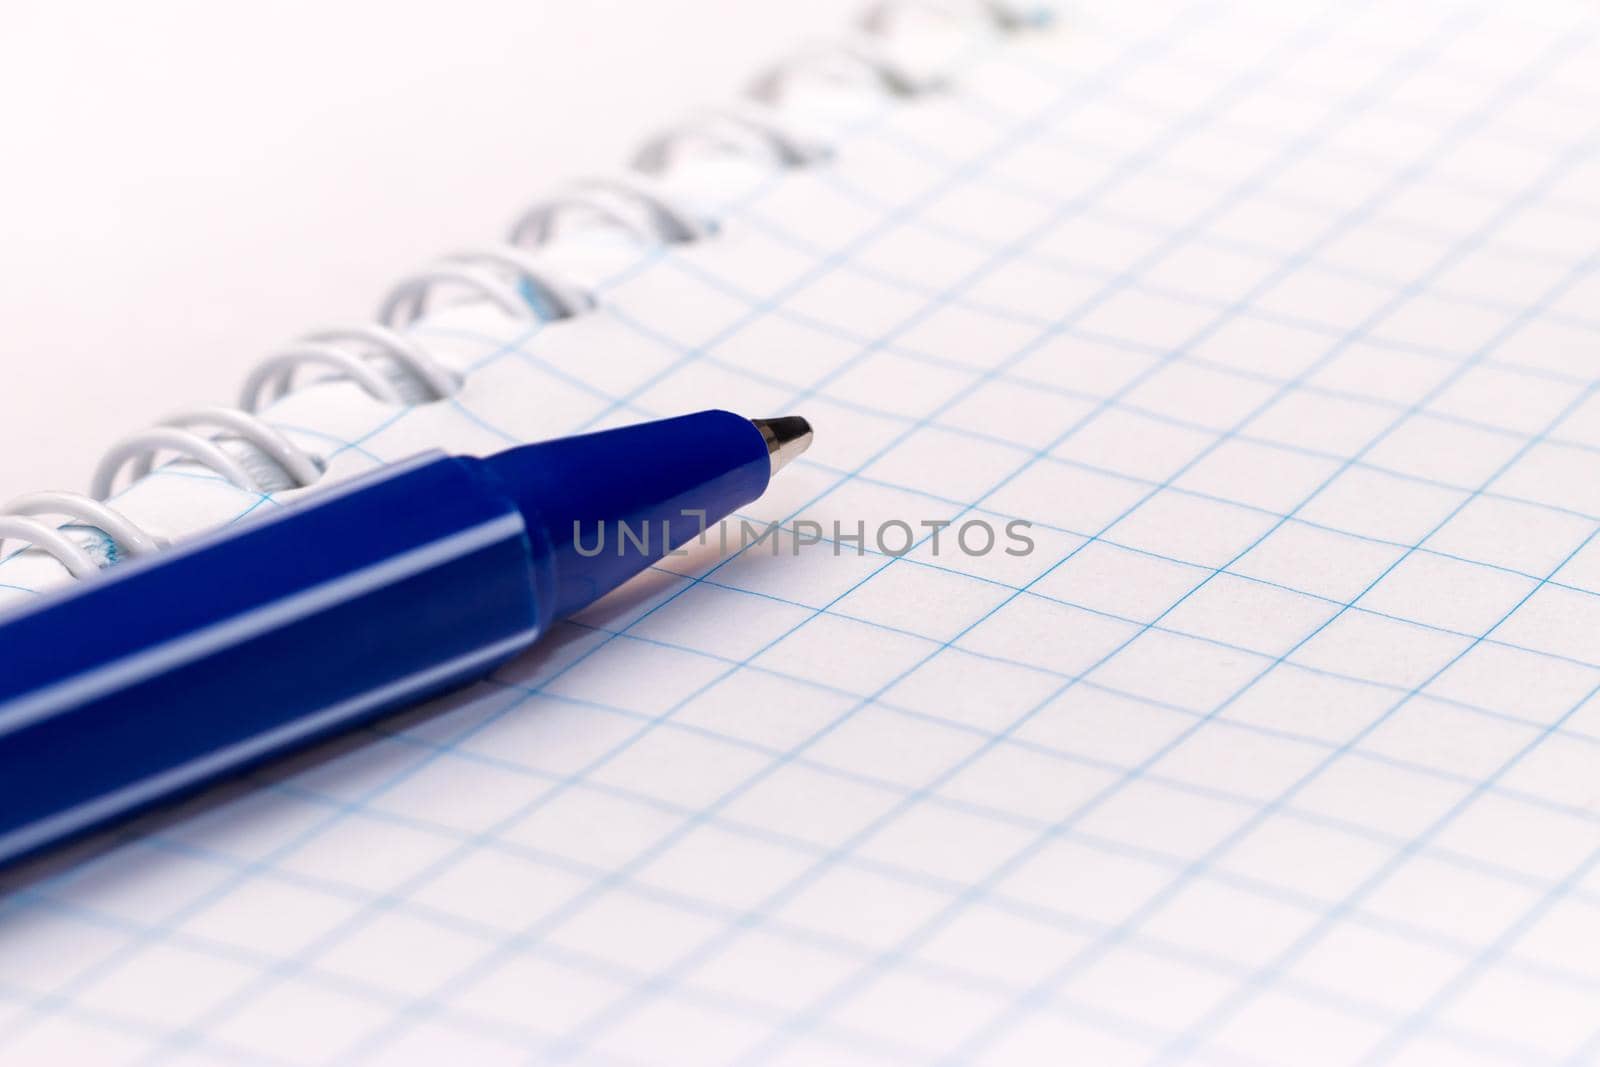 Blue ball pen on blank note book on white background. Close-up macro view